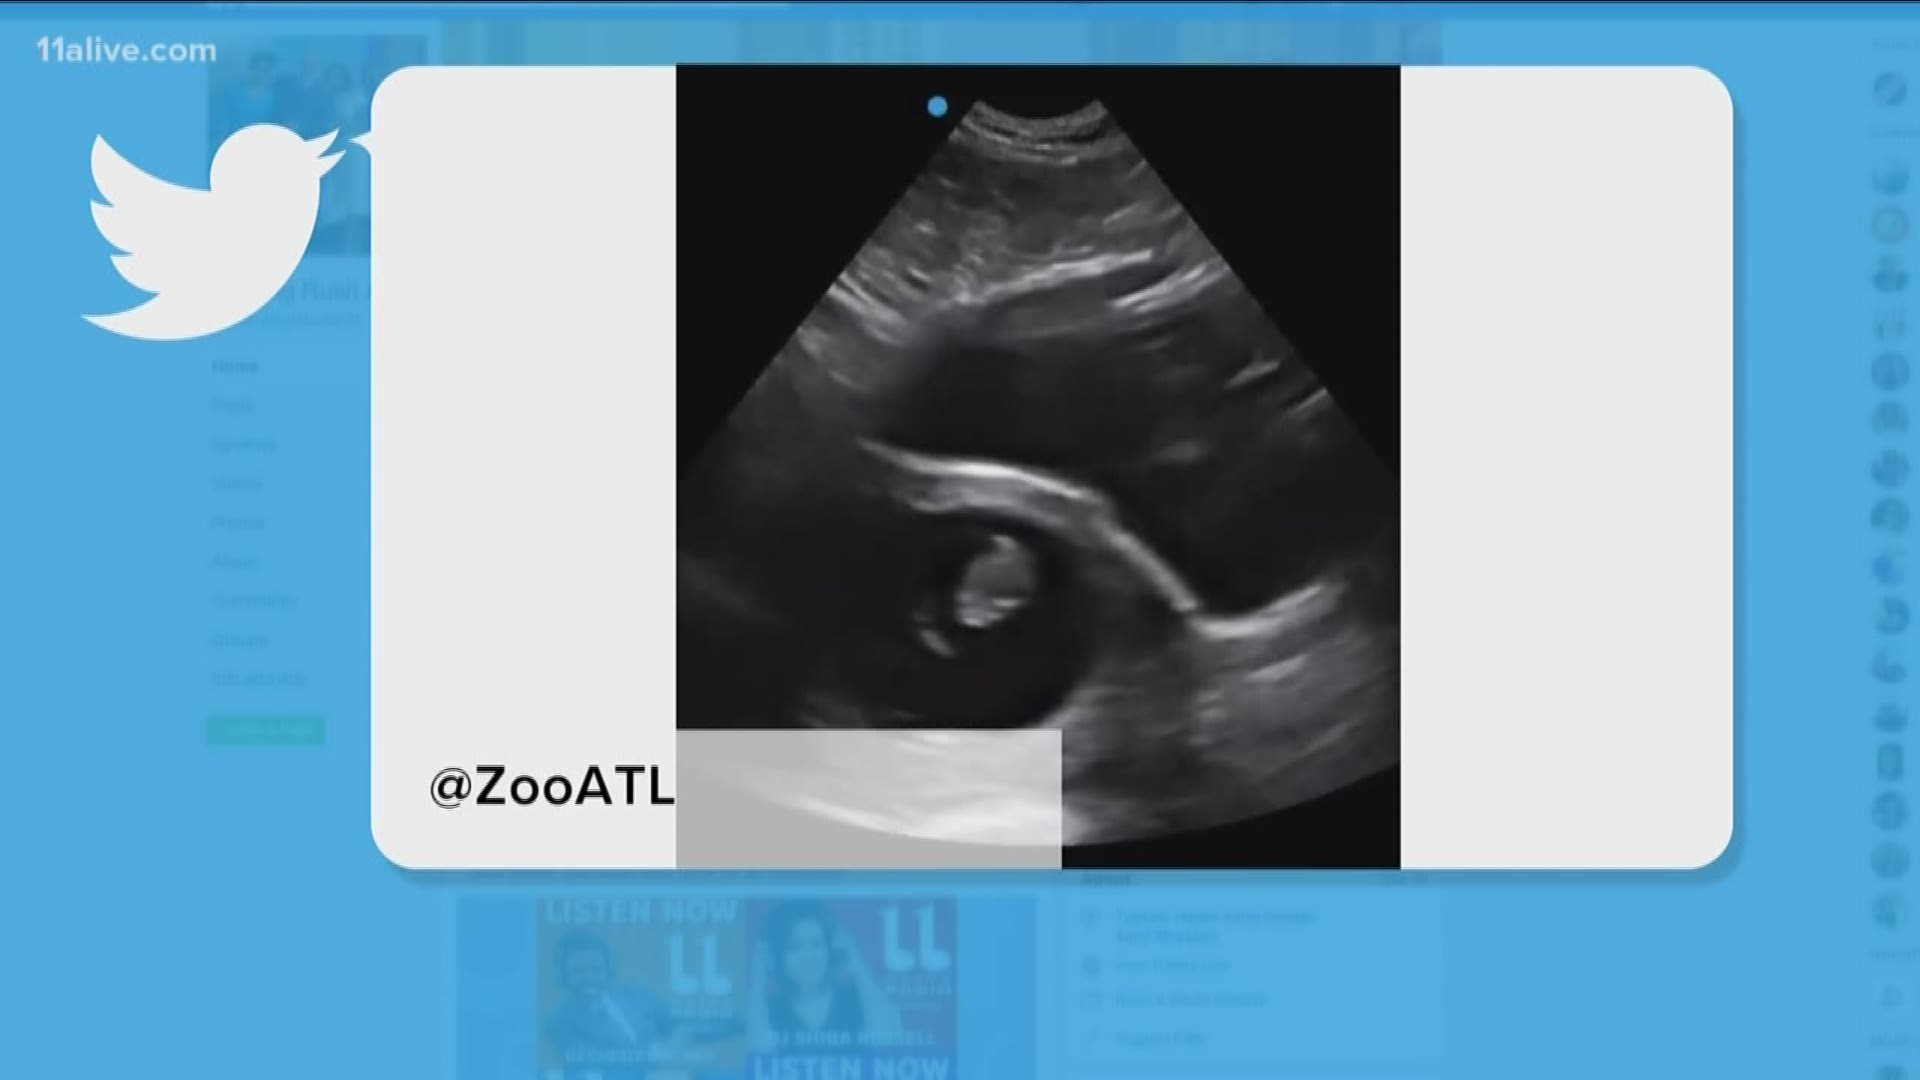 Zoo Atlanta announced they're expecting a baby gorilla this summer!